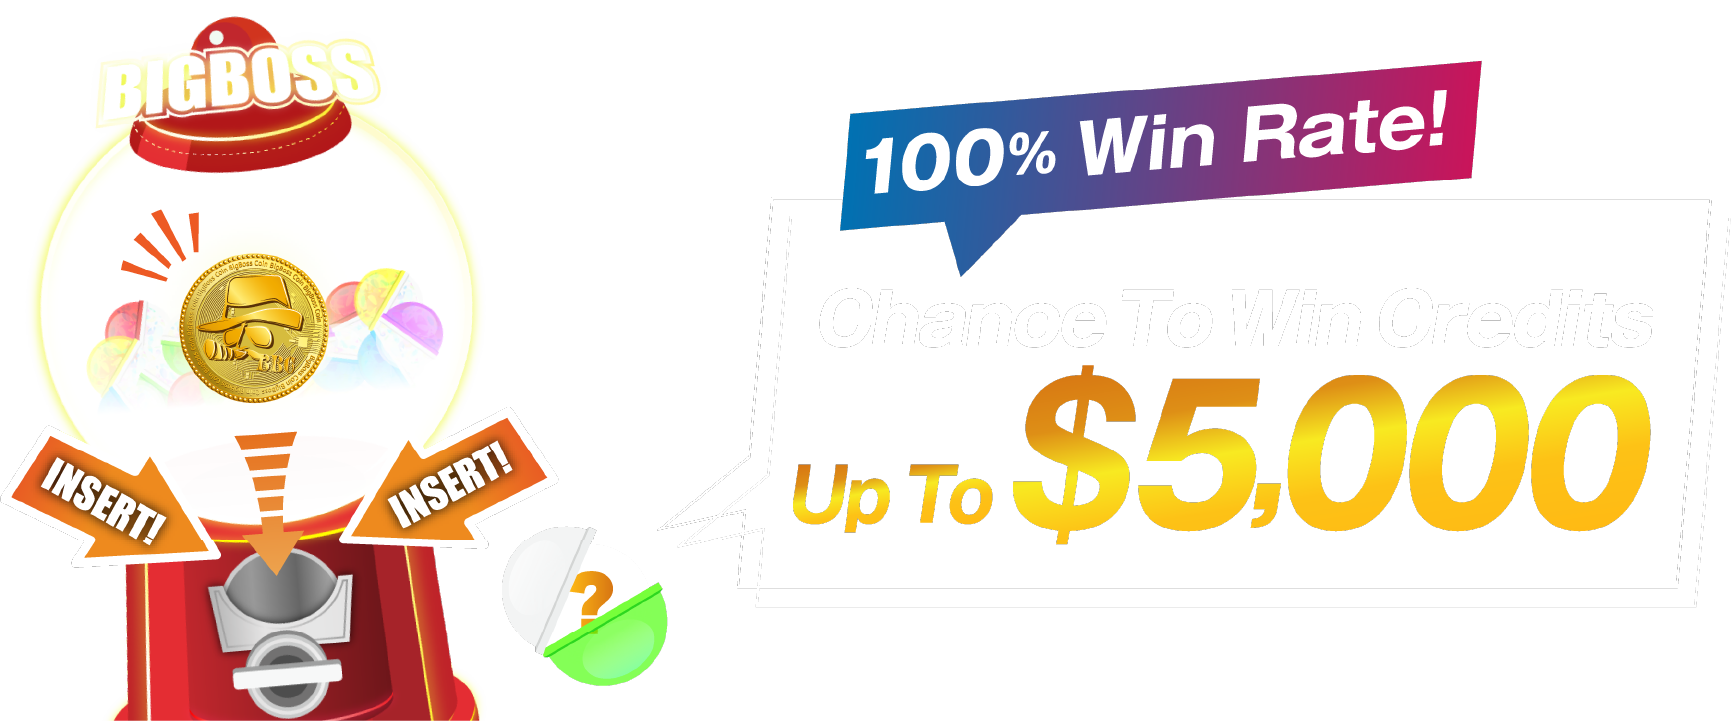 100% win rate chance to win credits up to $5000！